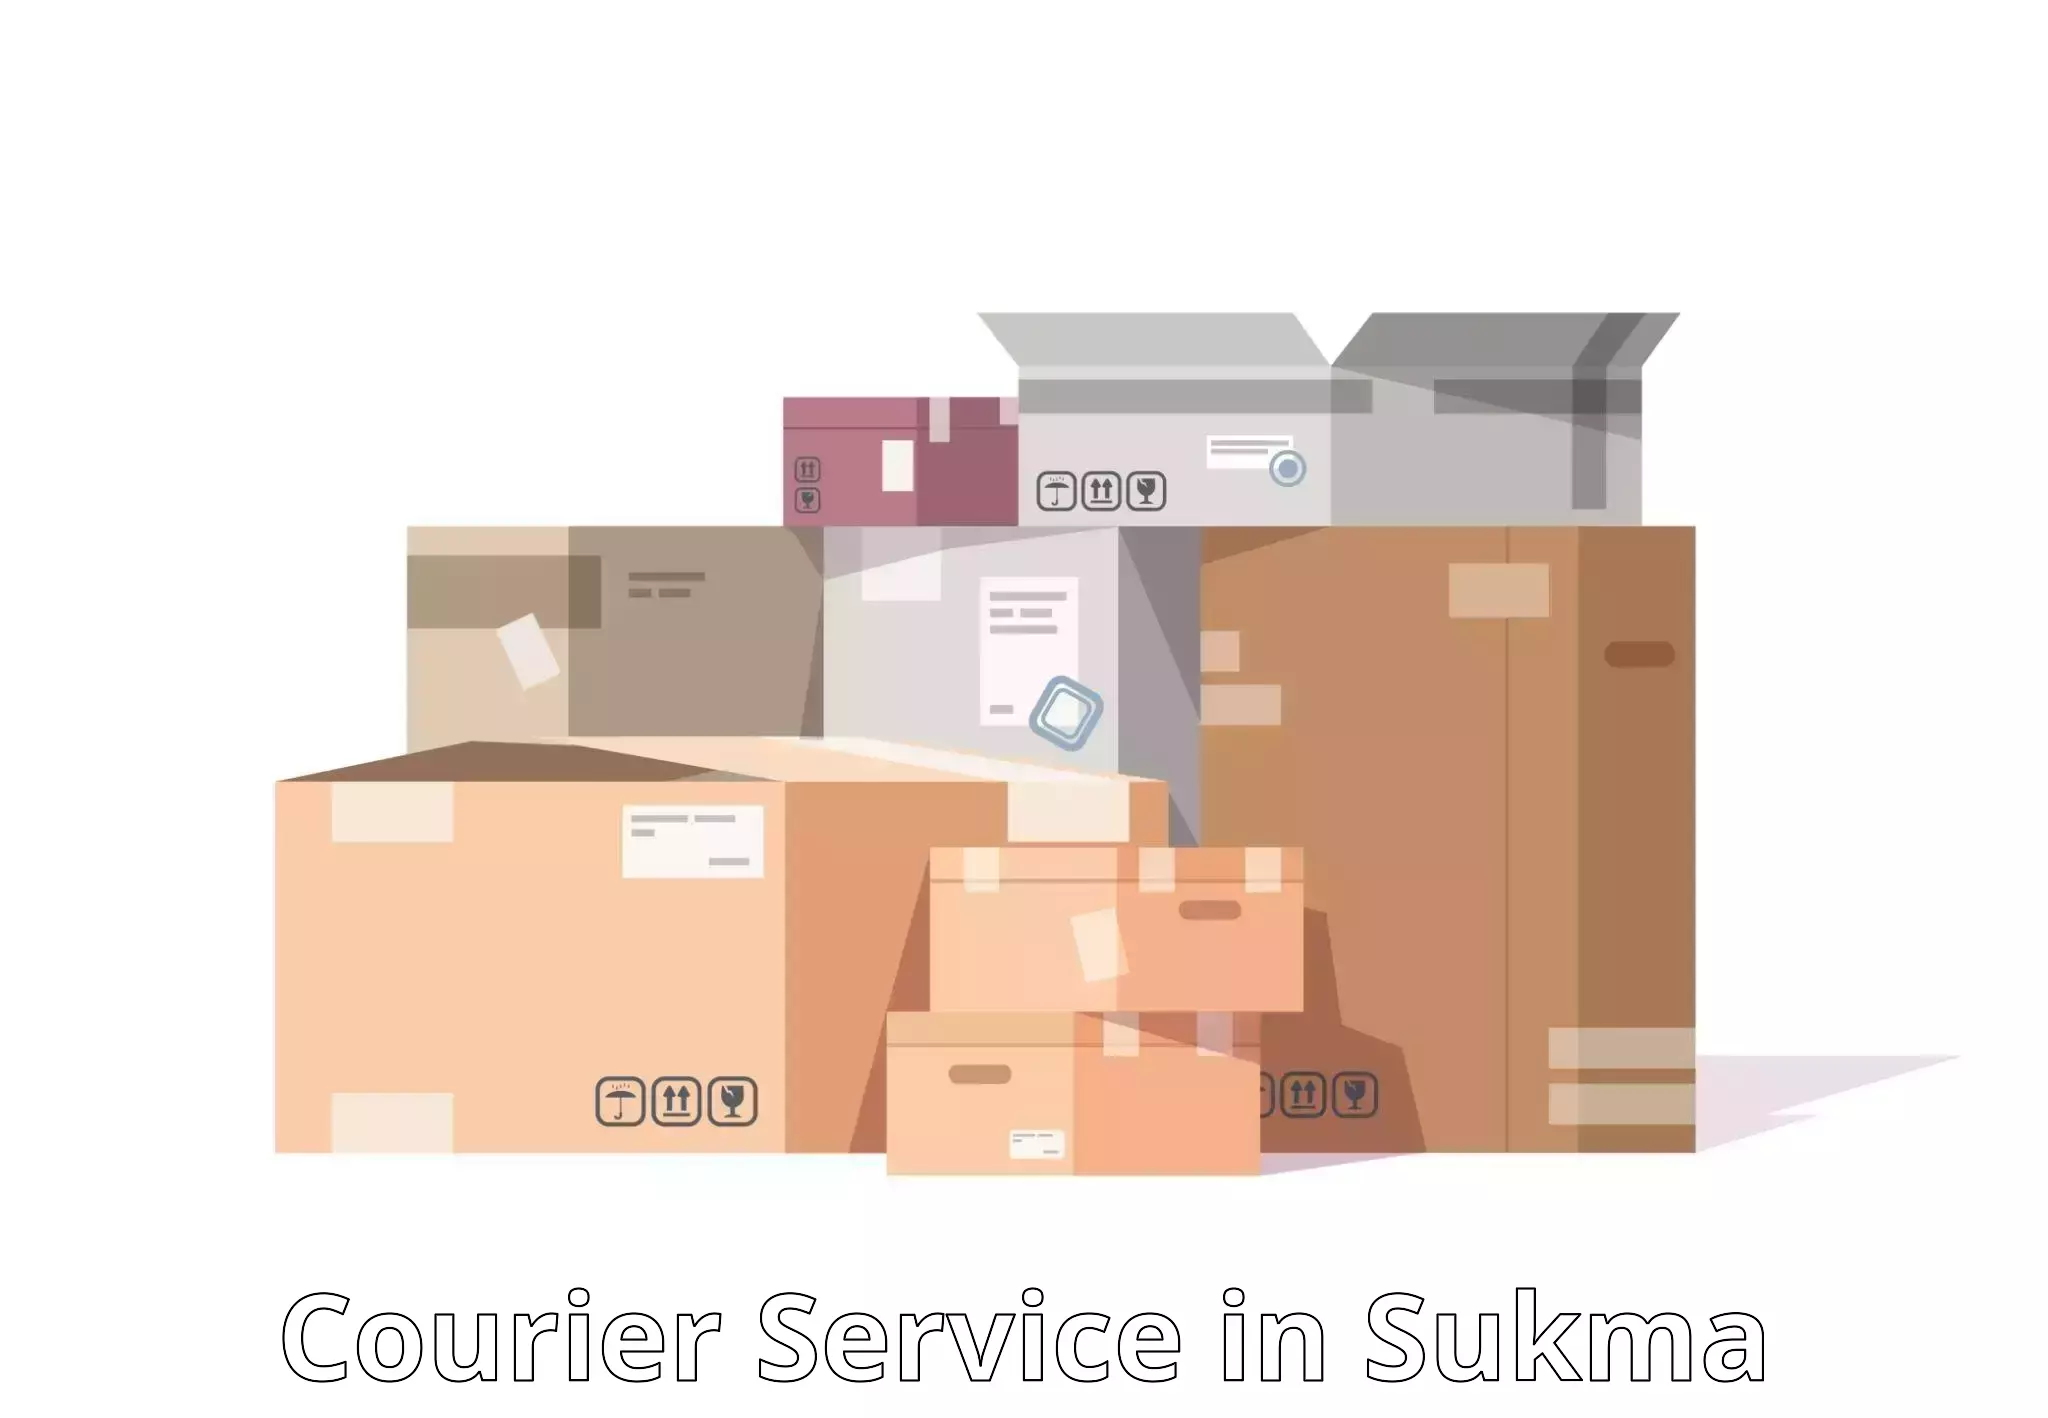 Full-service courier options in Sukma